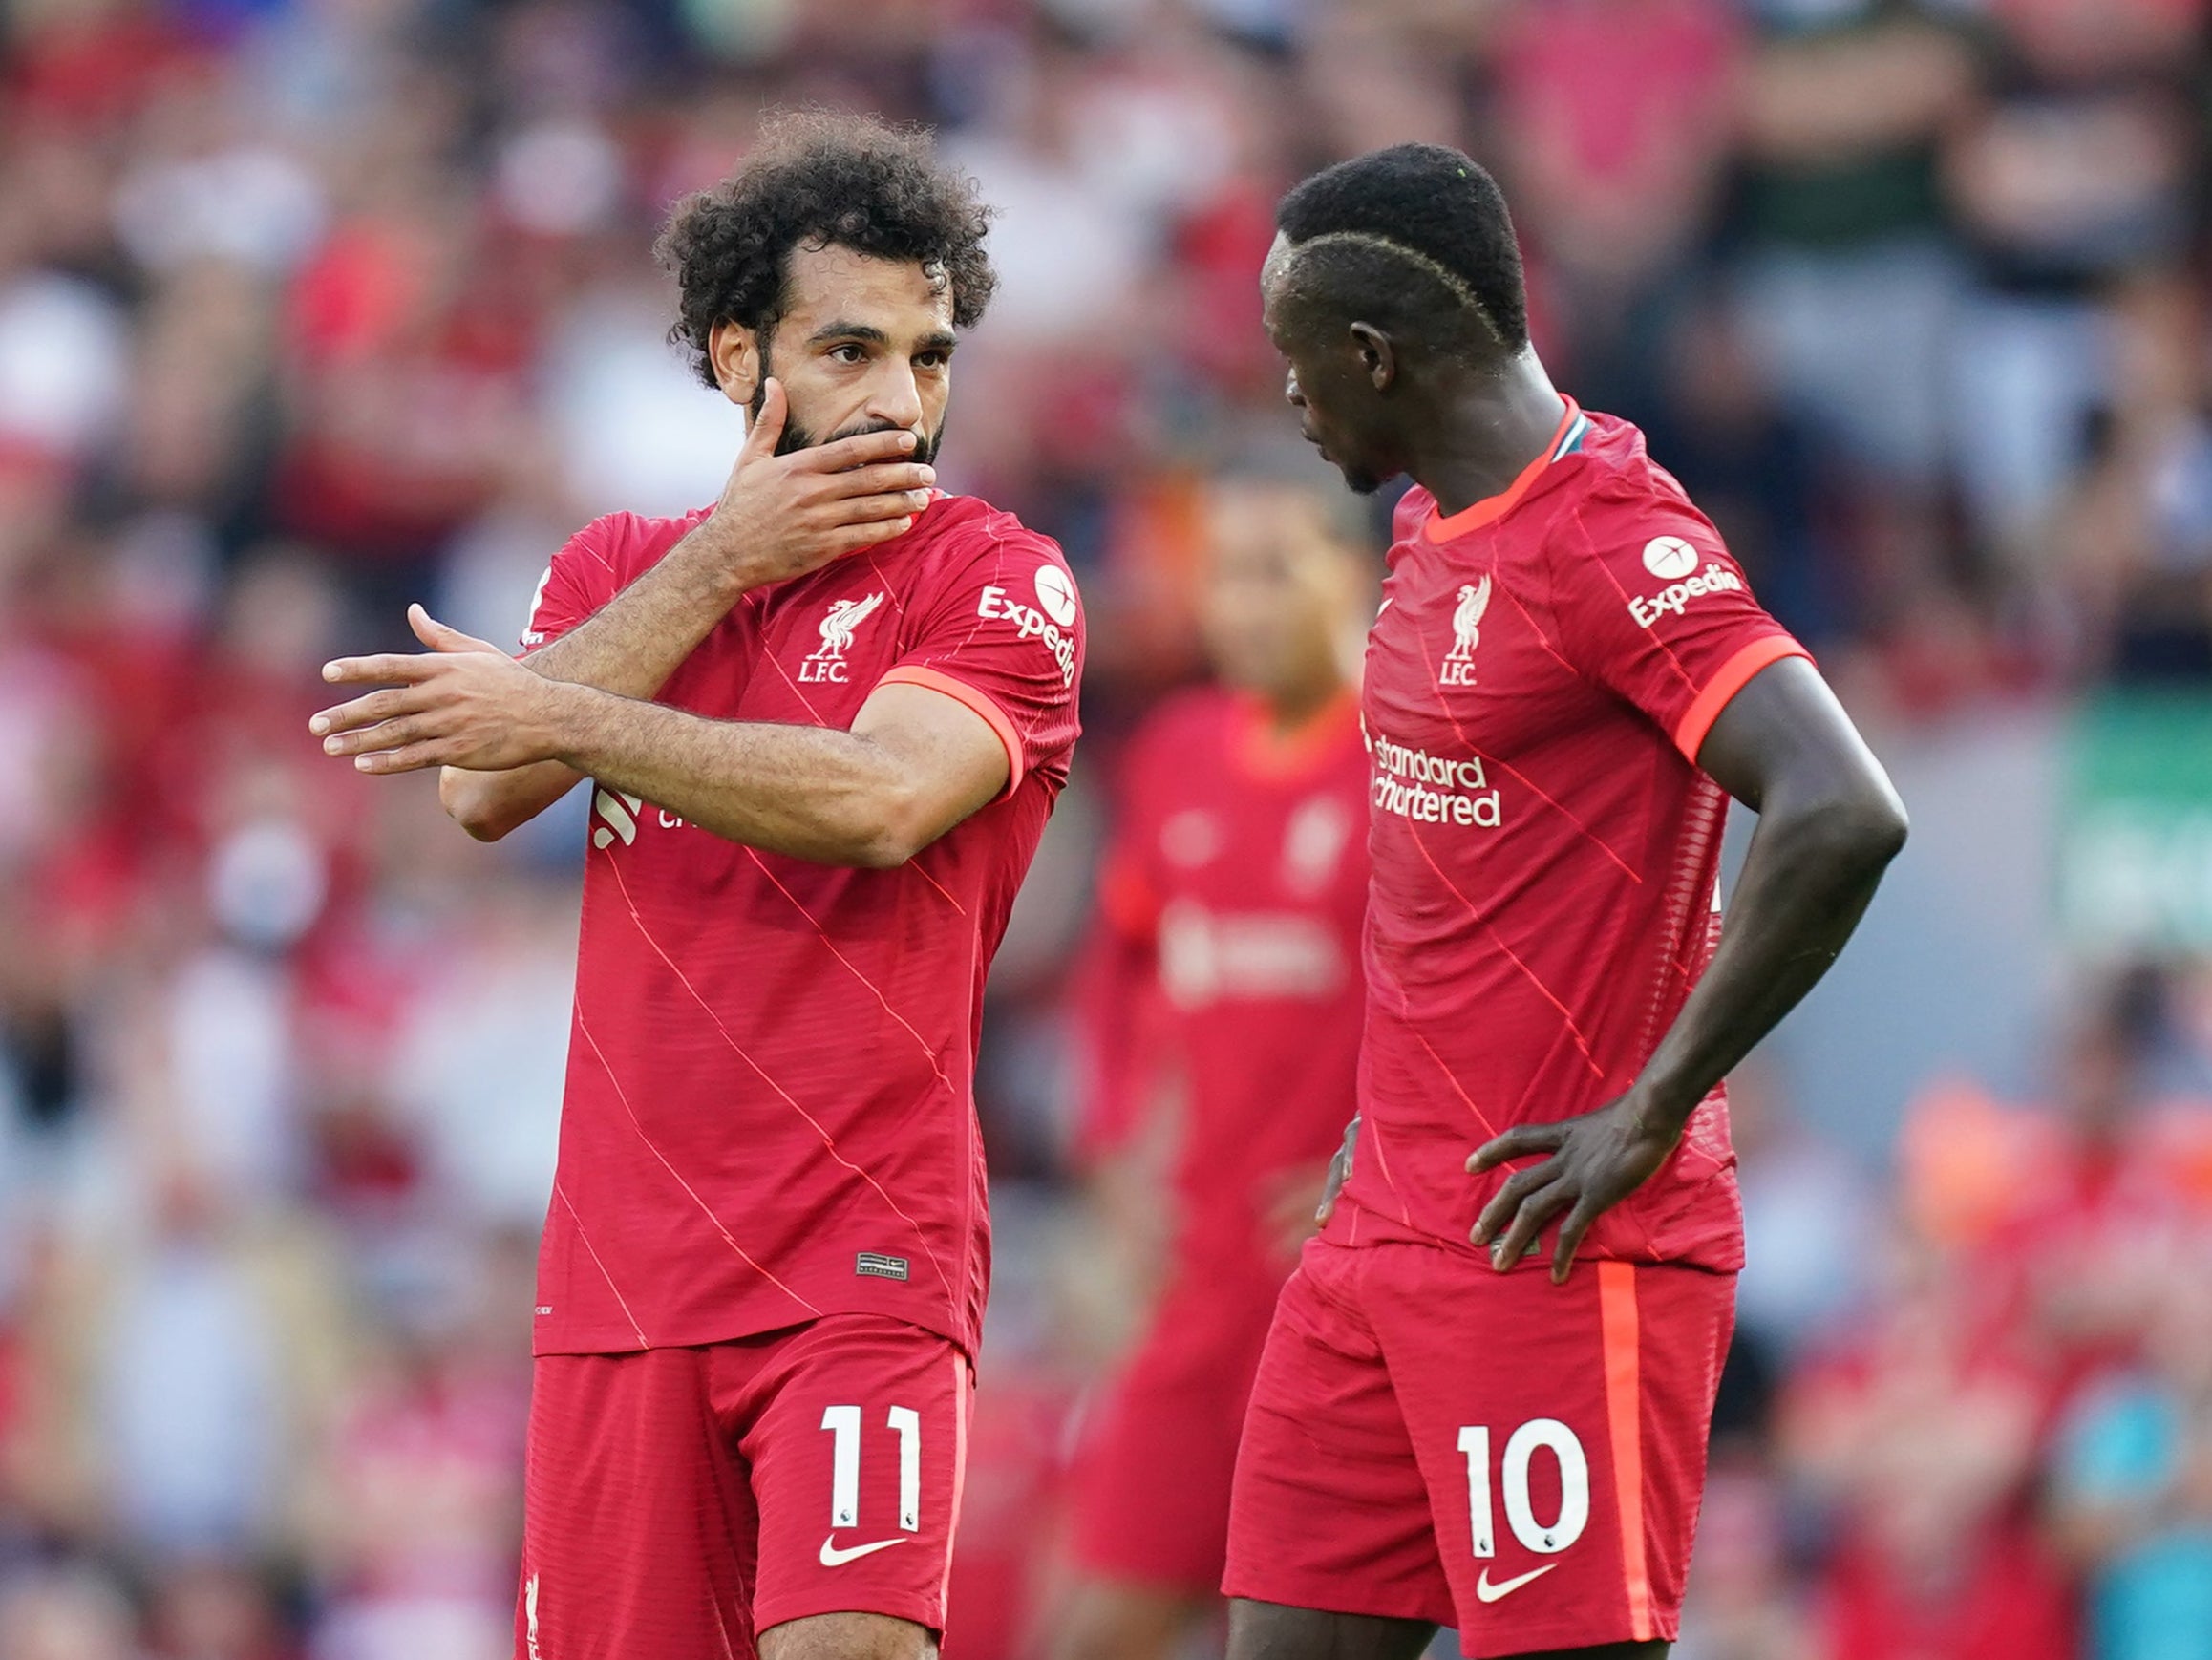 Liverpool team-mates Mohamed Salah and Sadio Mane go head-to-head in the African Cup of Nations on Sunday (Mike Egerton/PA)